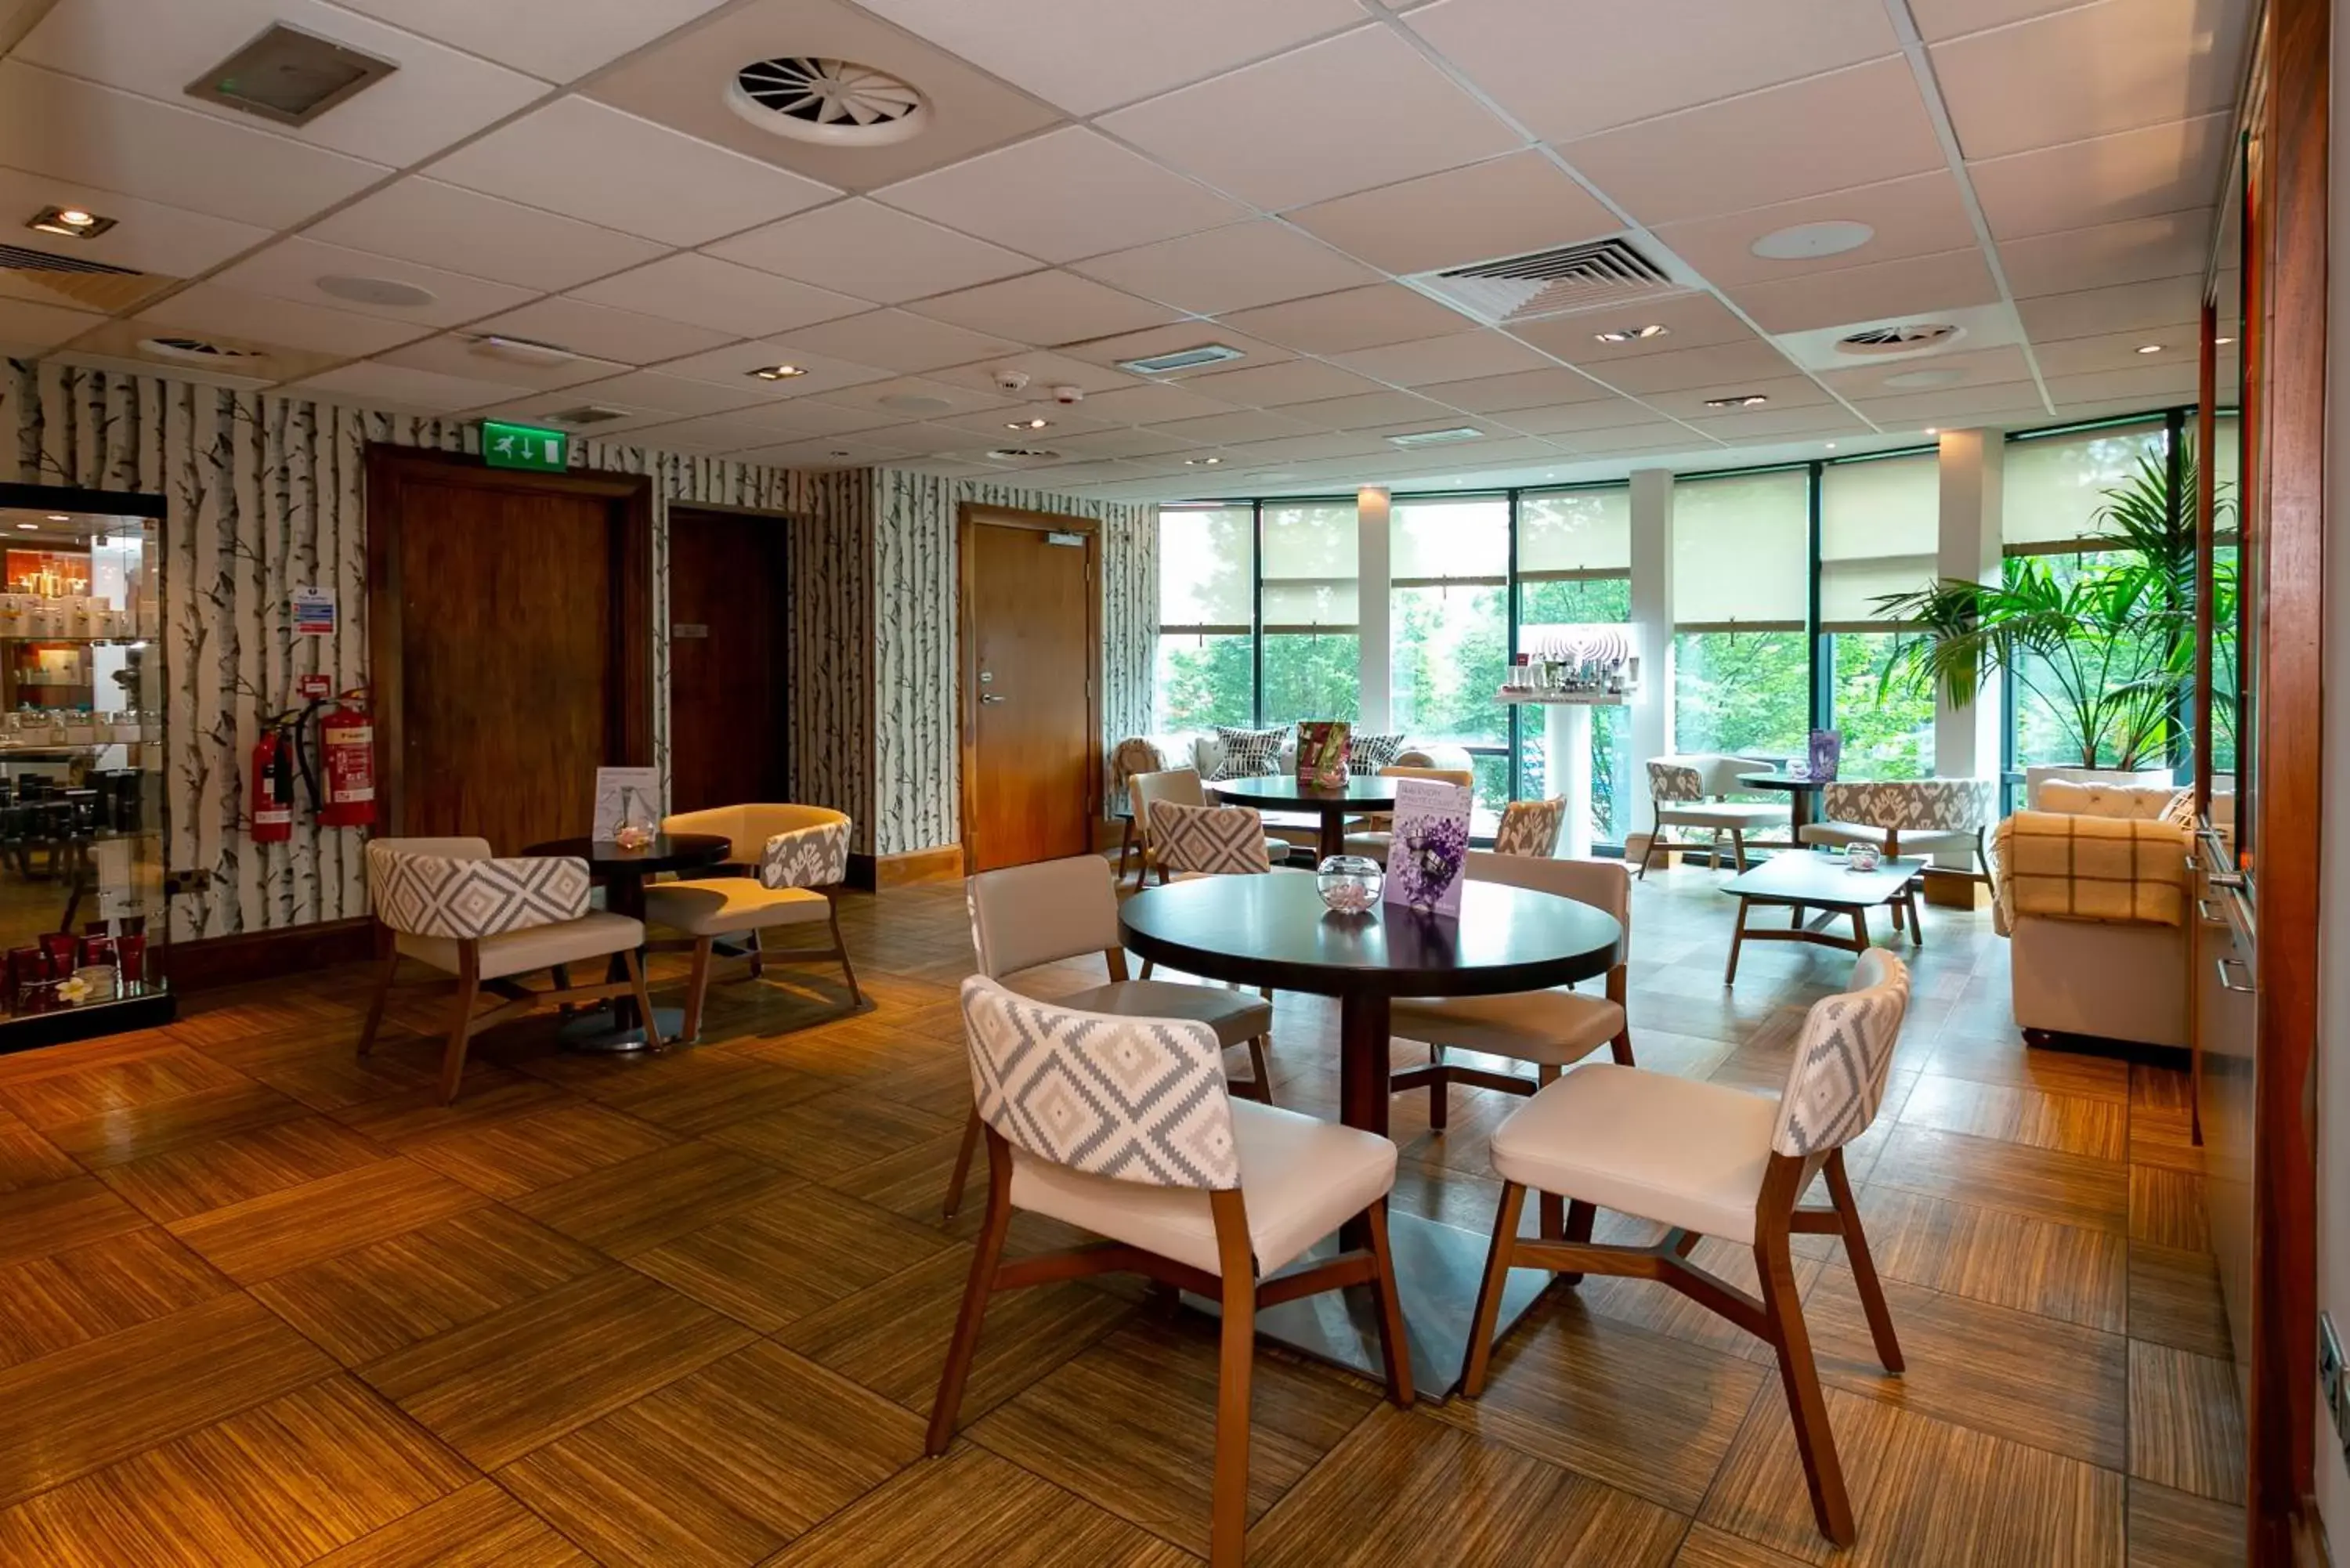 Spa and wellness centre/facilities in Manchester Piccadilly Hotel